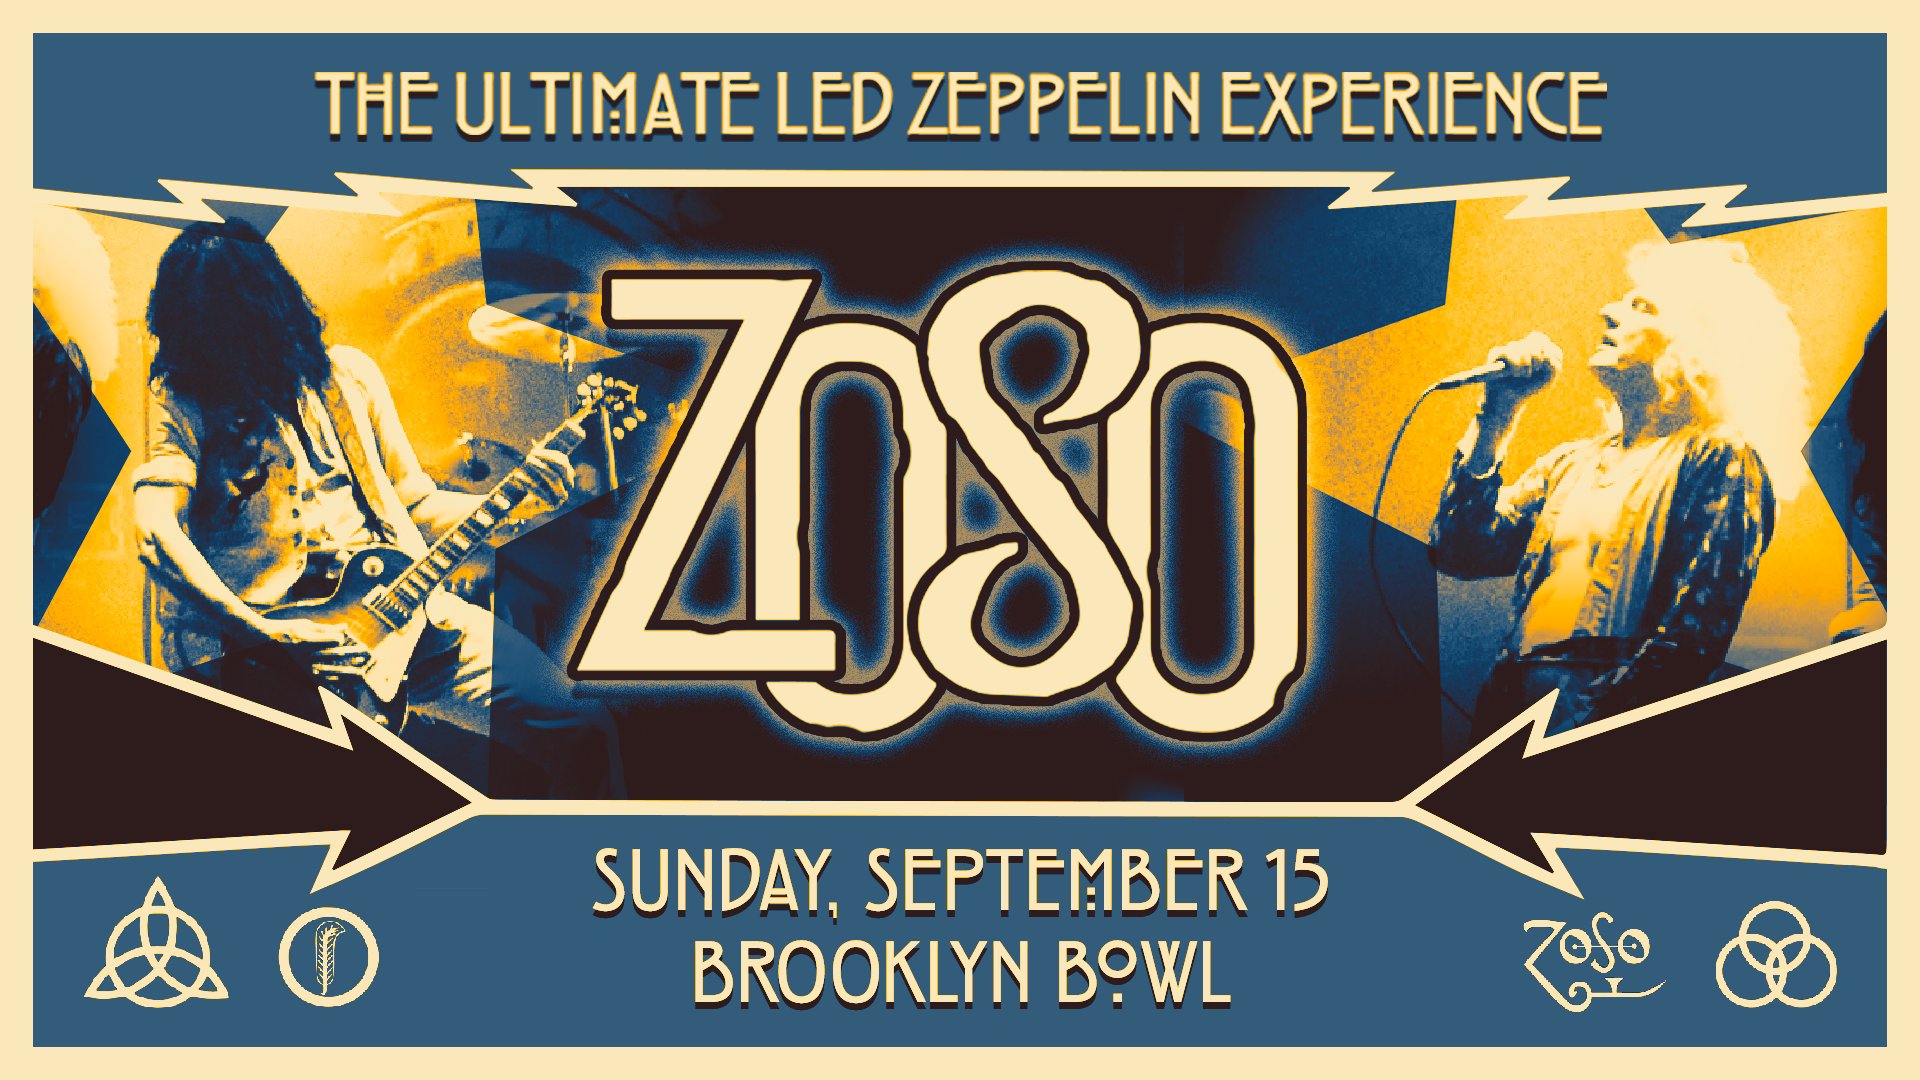 More Info for Zoso The Ultimate Led Zeppelin Experience